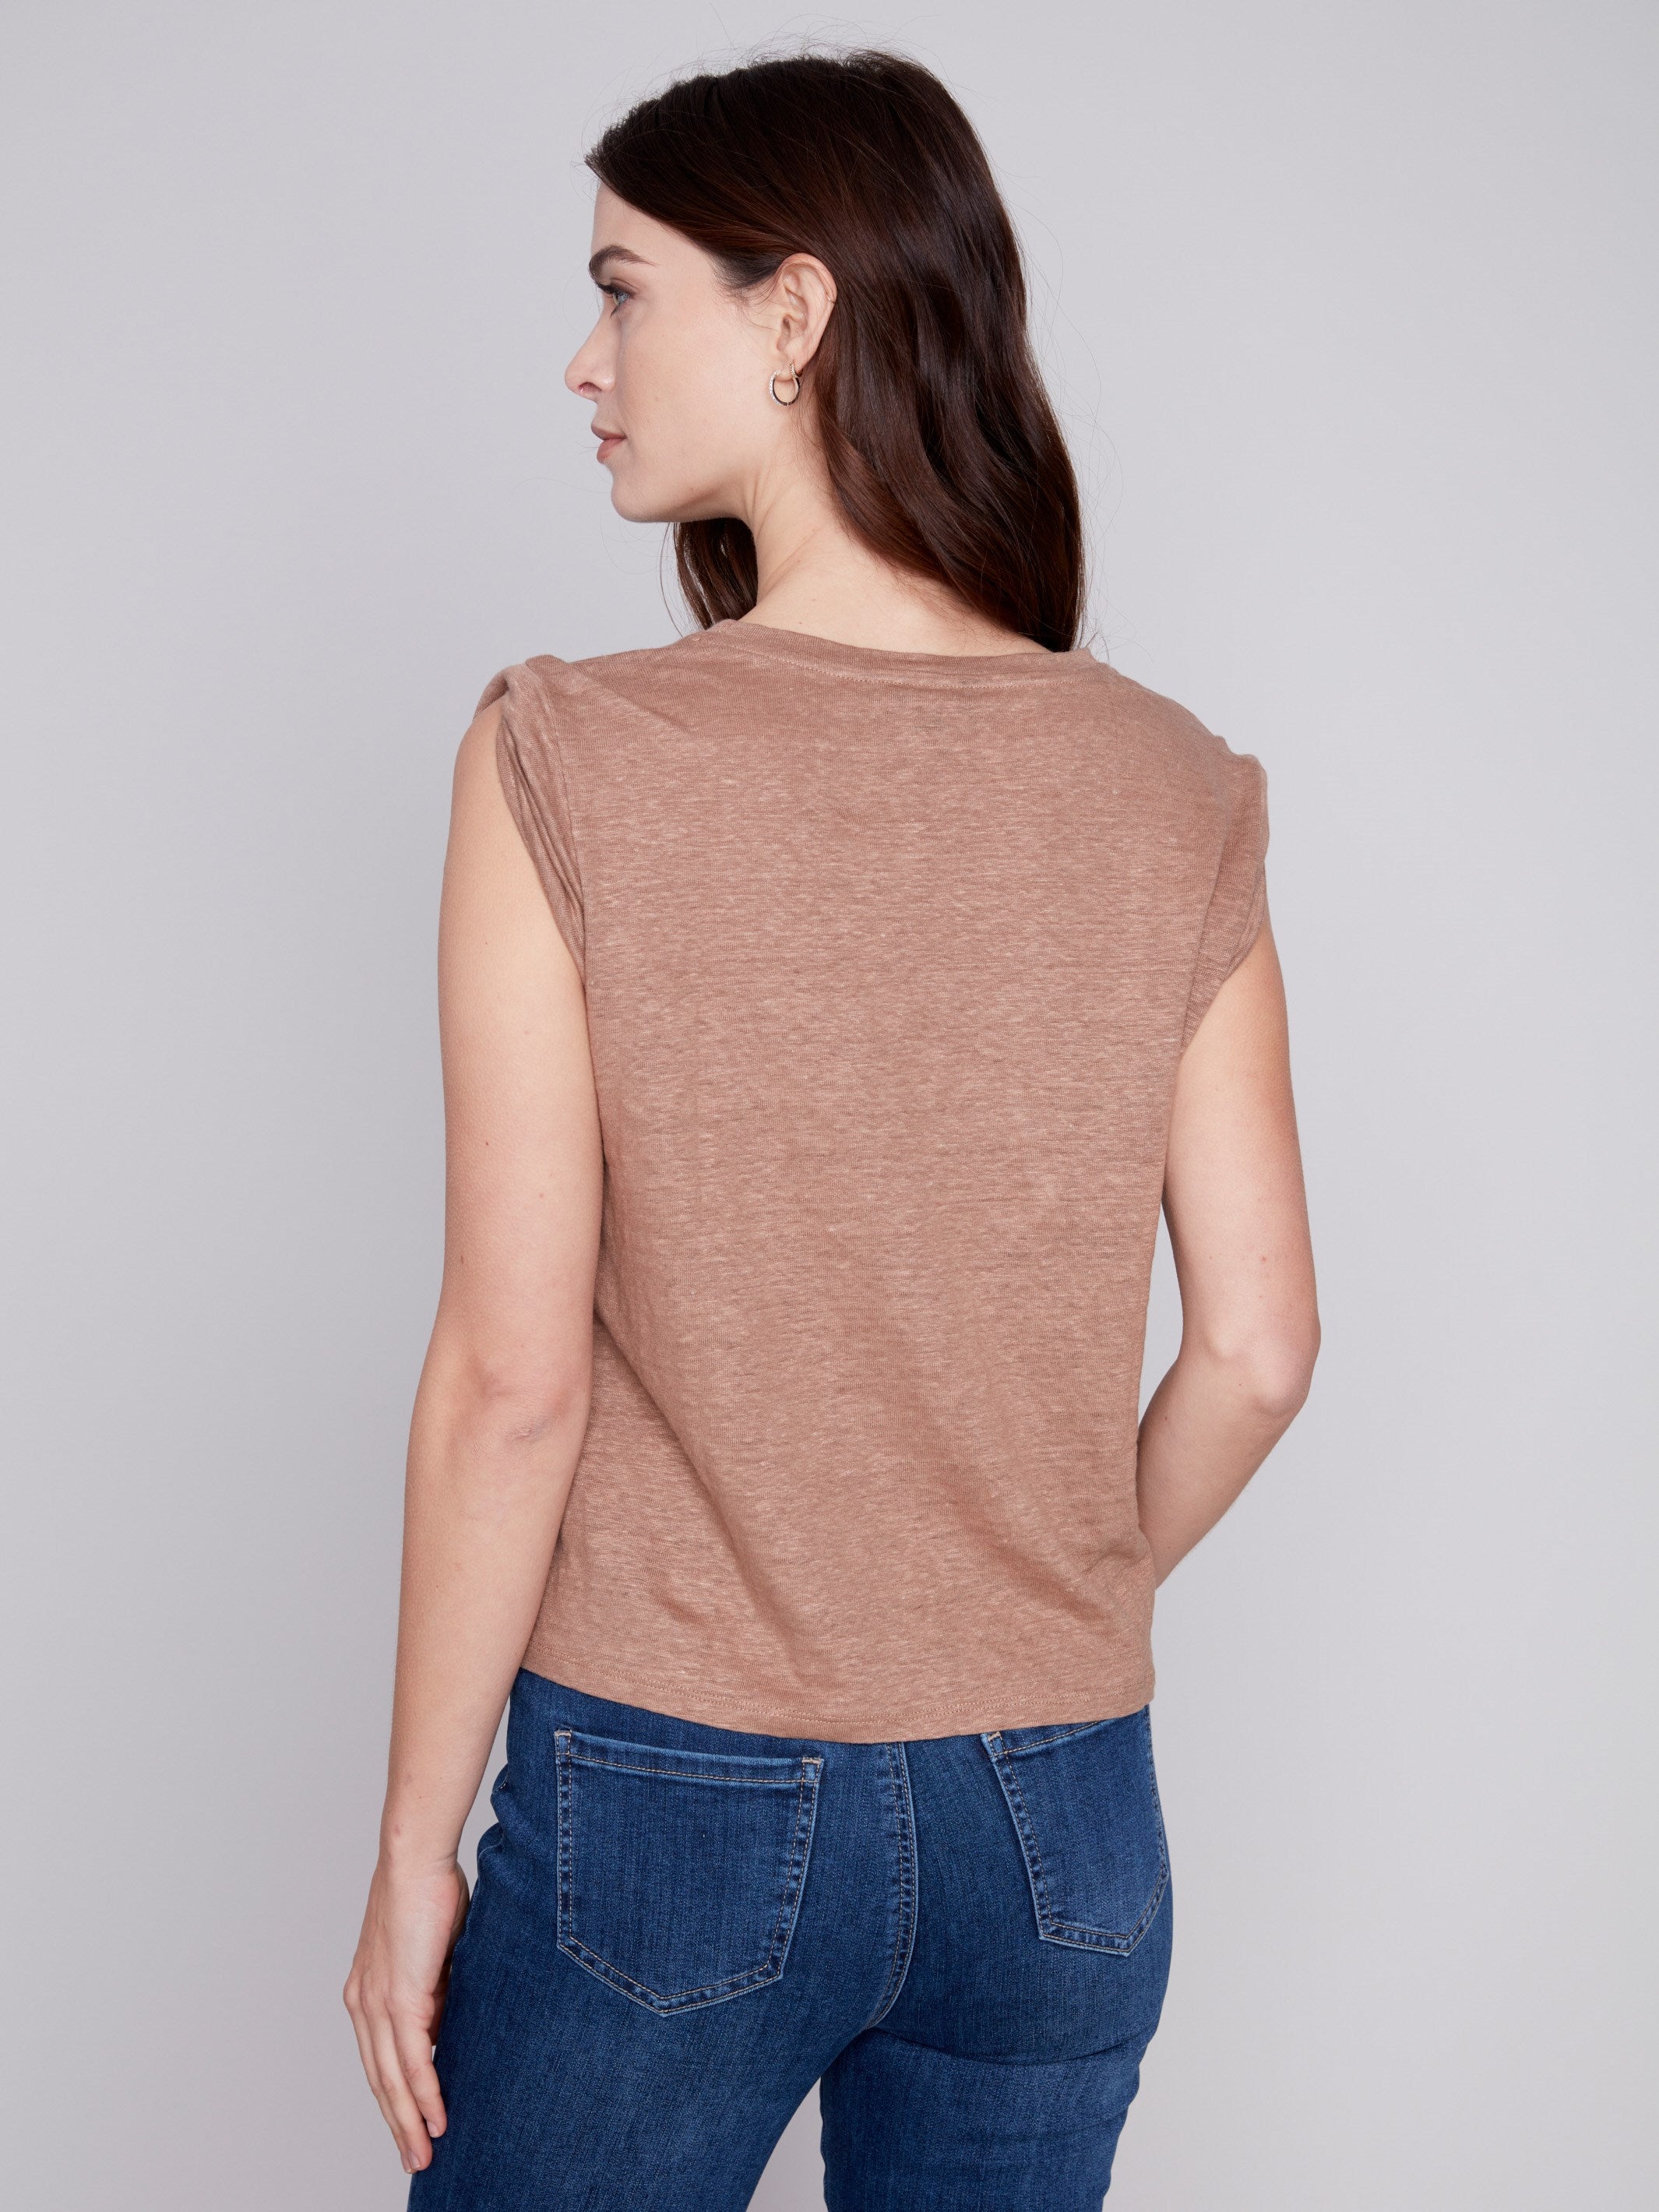 Charlie B Linen Tank Top with Sleeve Detail - Caramel - Image 7